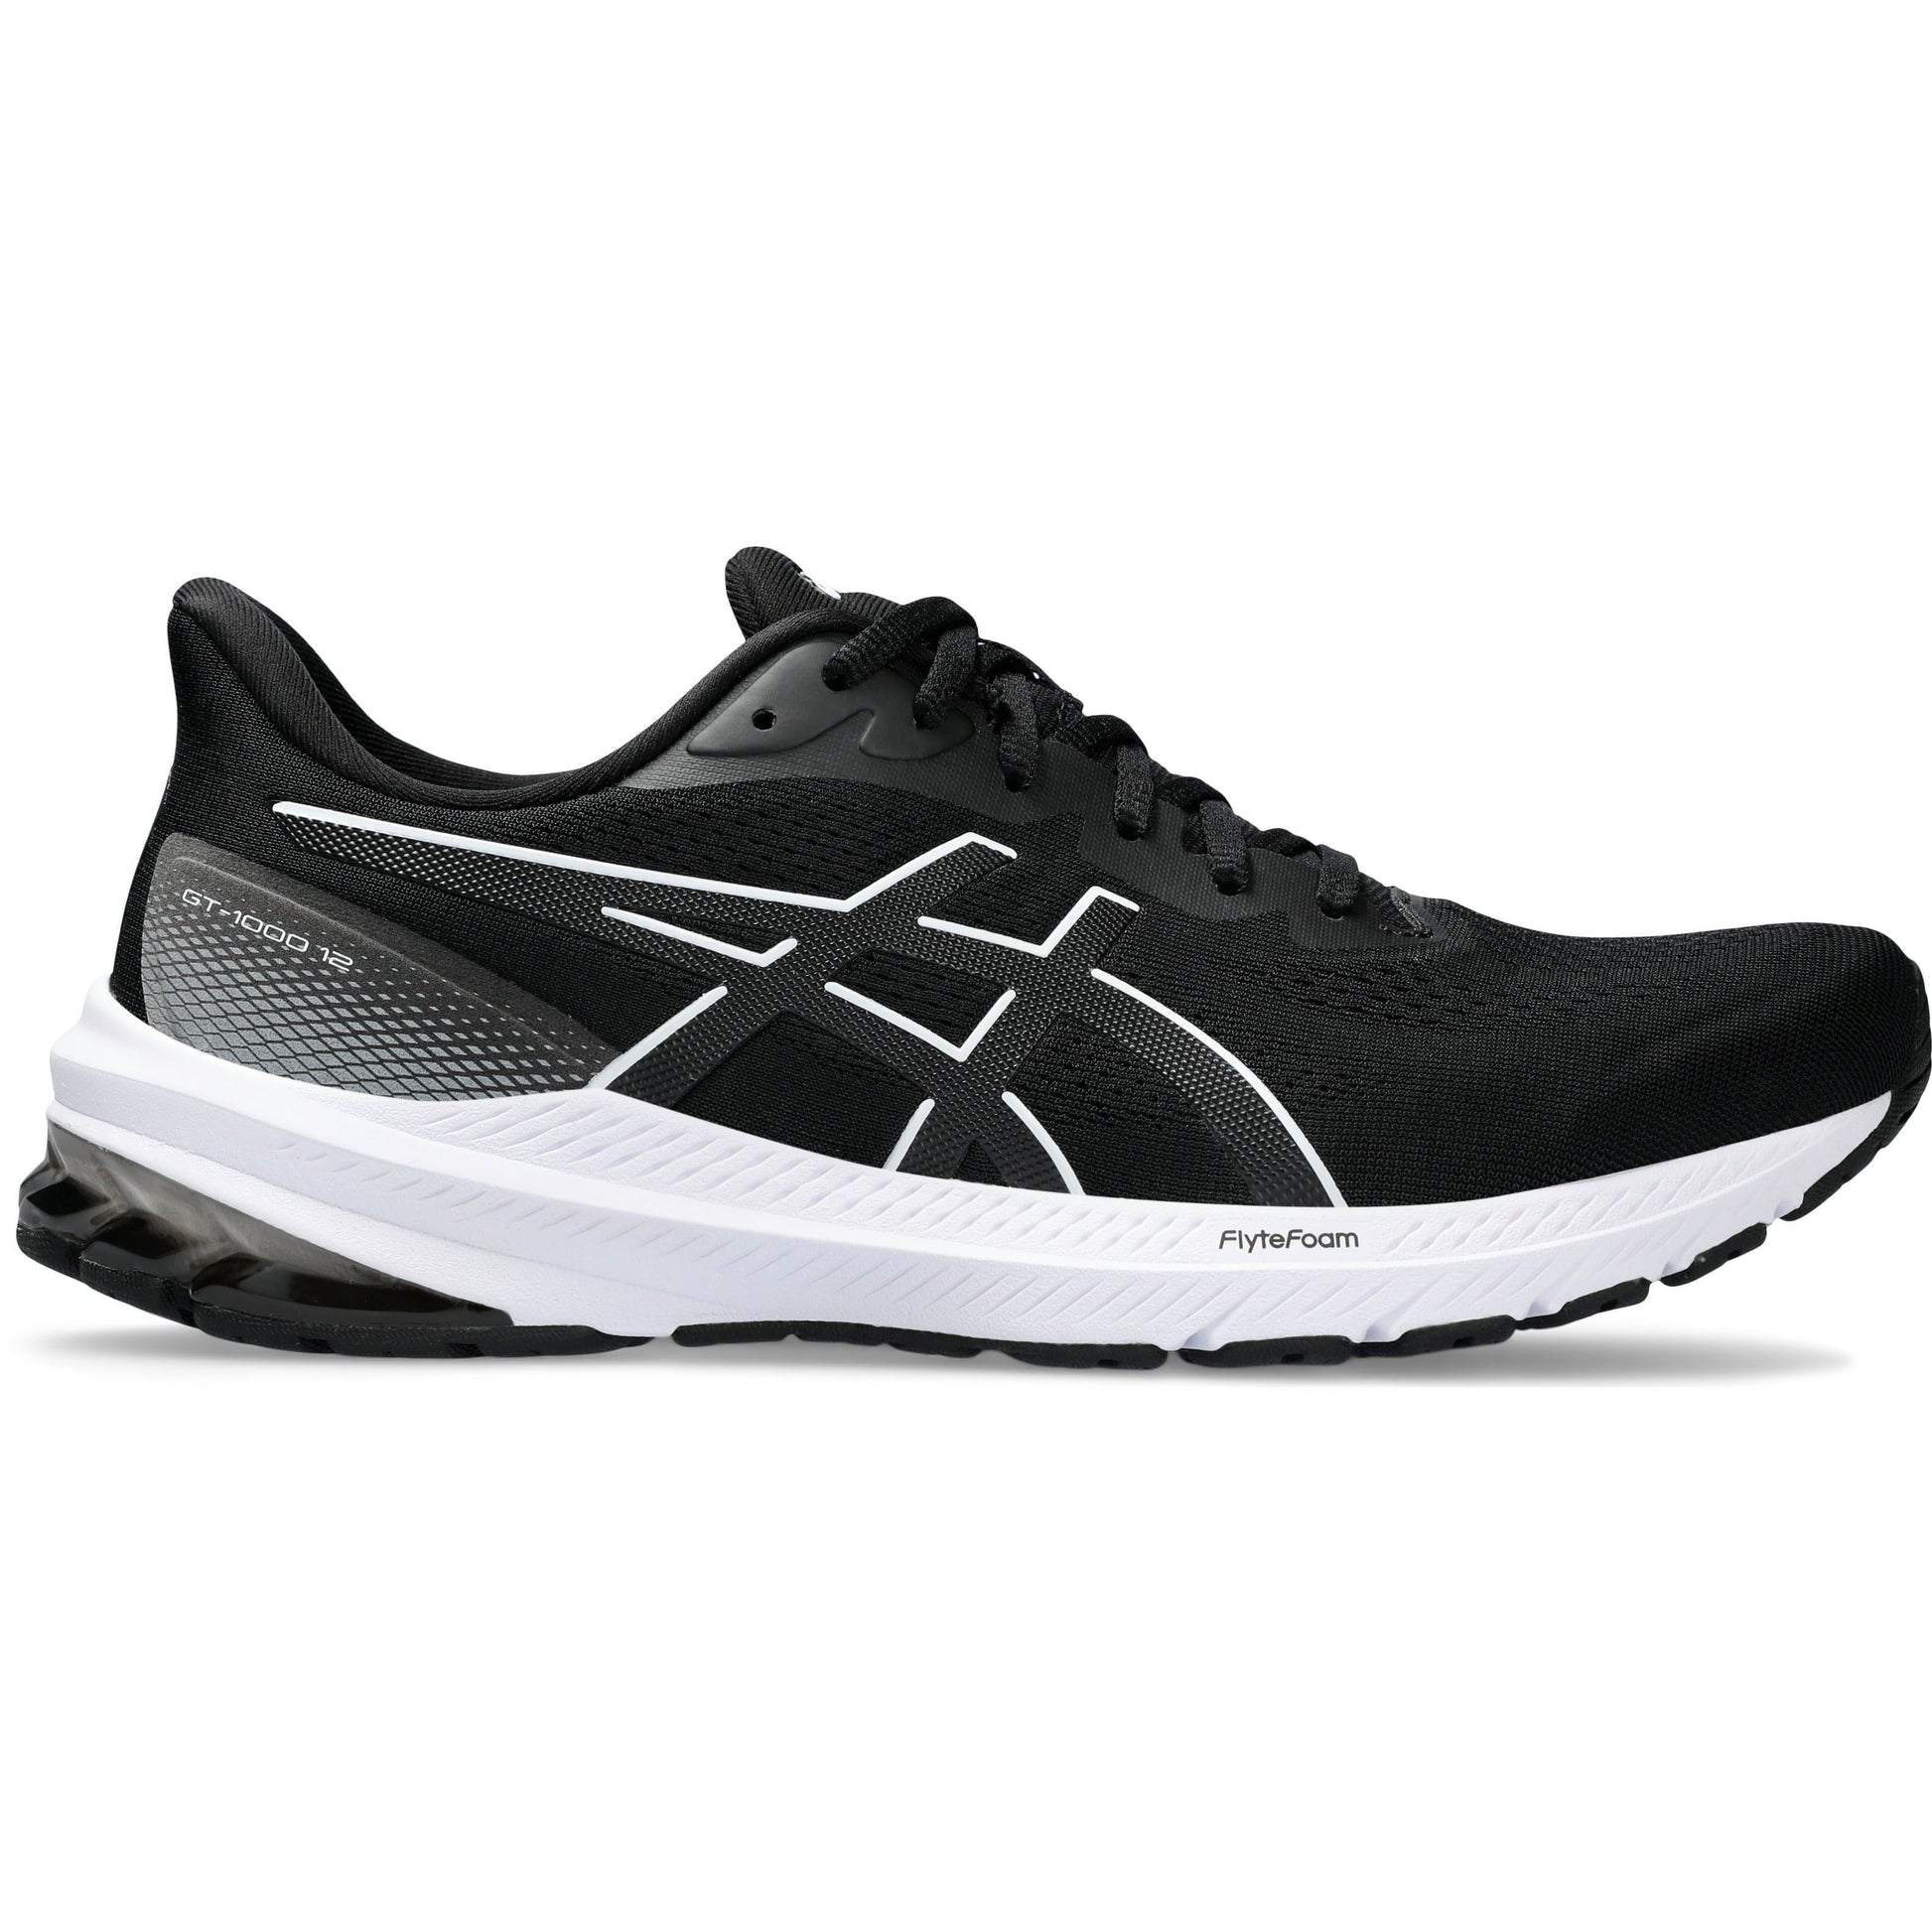 Black ASICS GT-1000 running shoes for men with white accents, FlyteFoam technology, and athletic mesh design